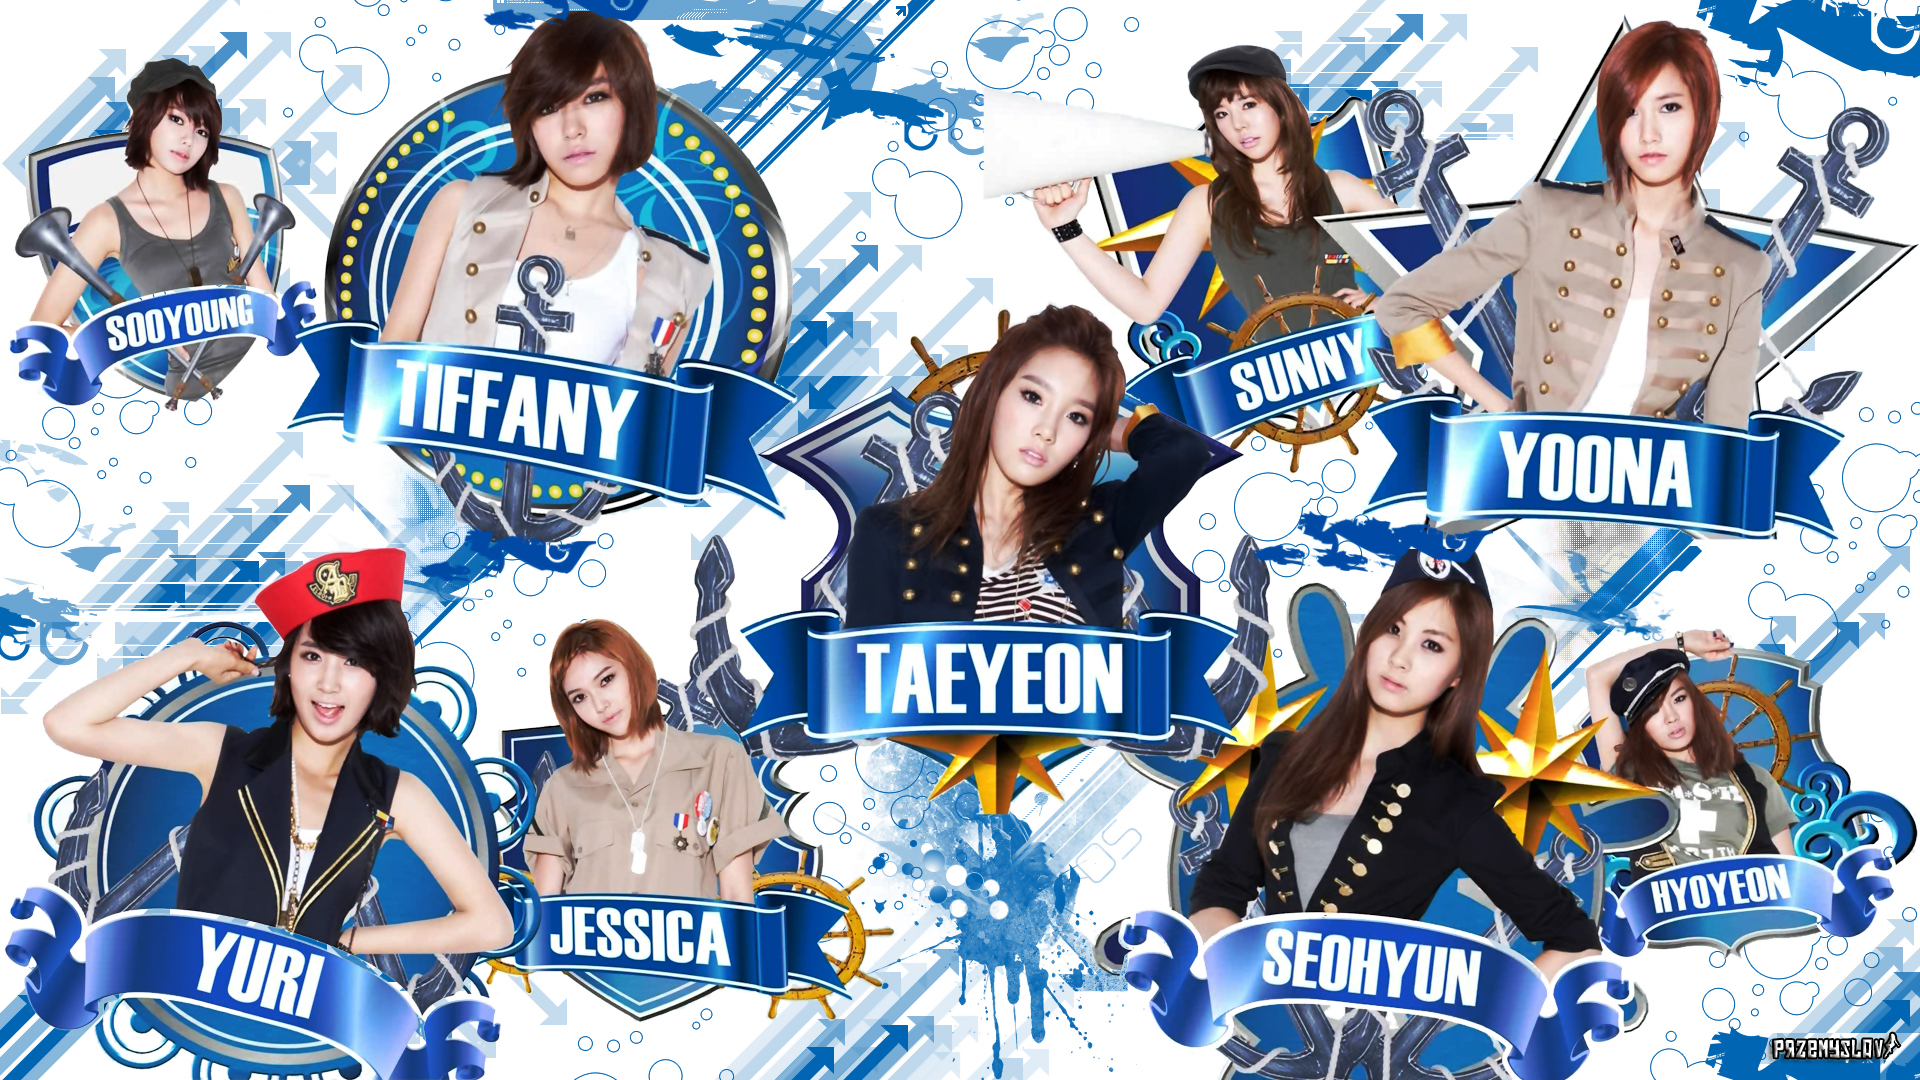 Snsd Members Kpop 1961873 With Resolutions 19201080 Pixel